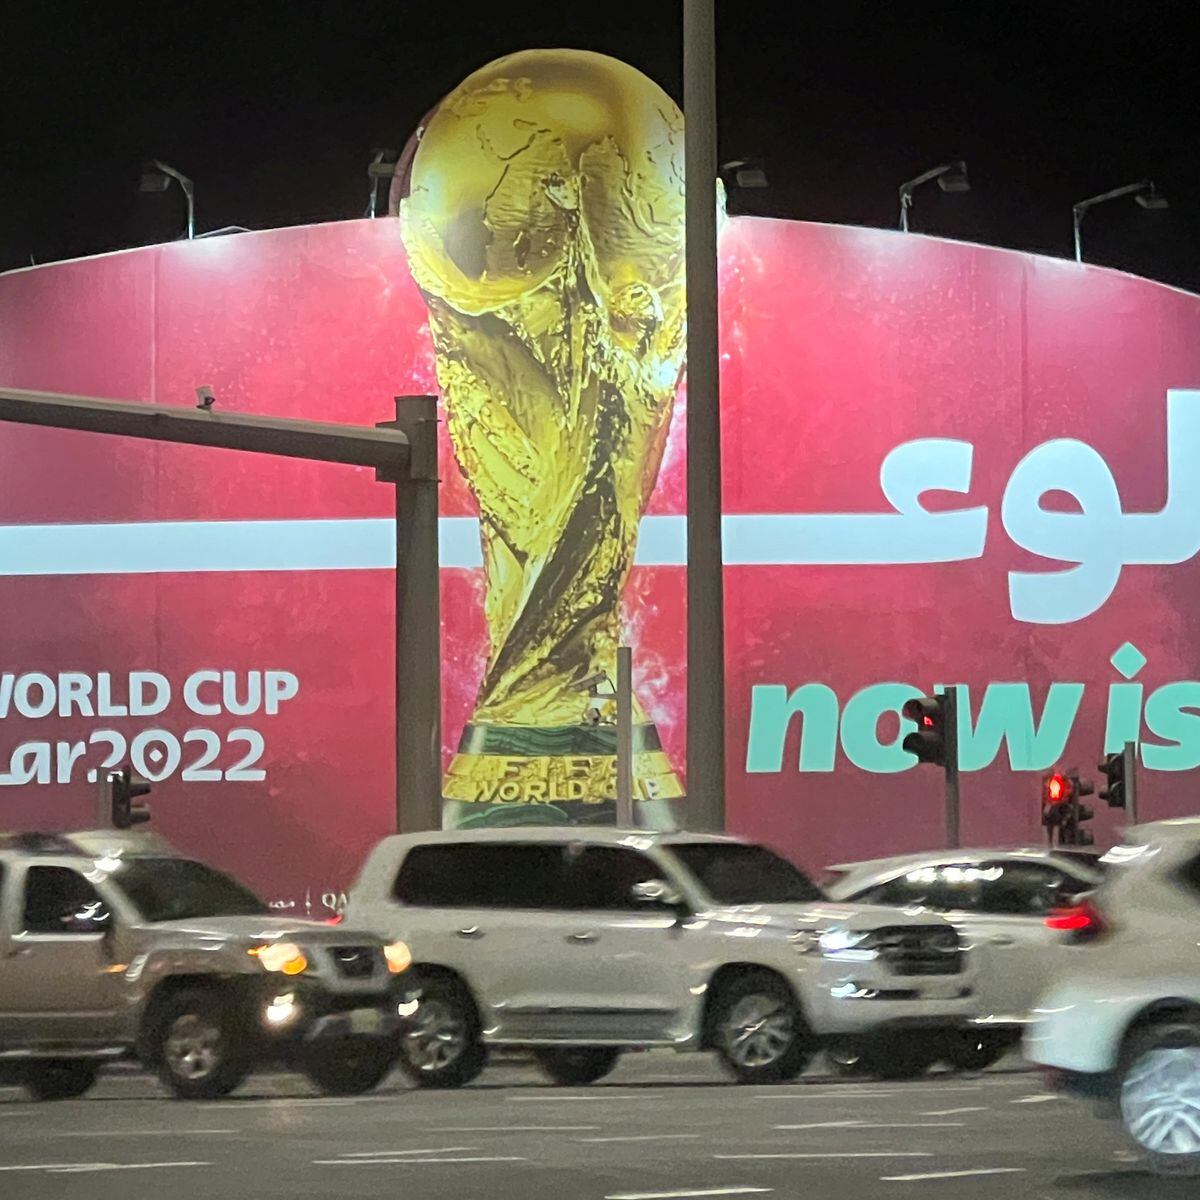 Qatar FIFA World Cup ambassador says homosexuality is 'damage in the mind